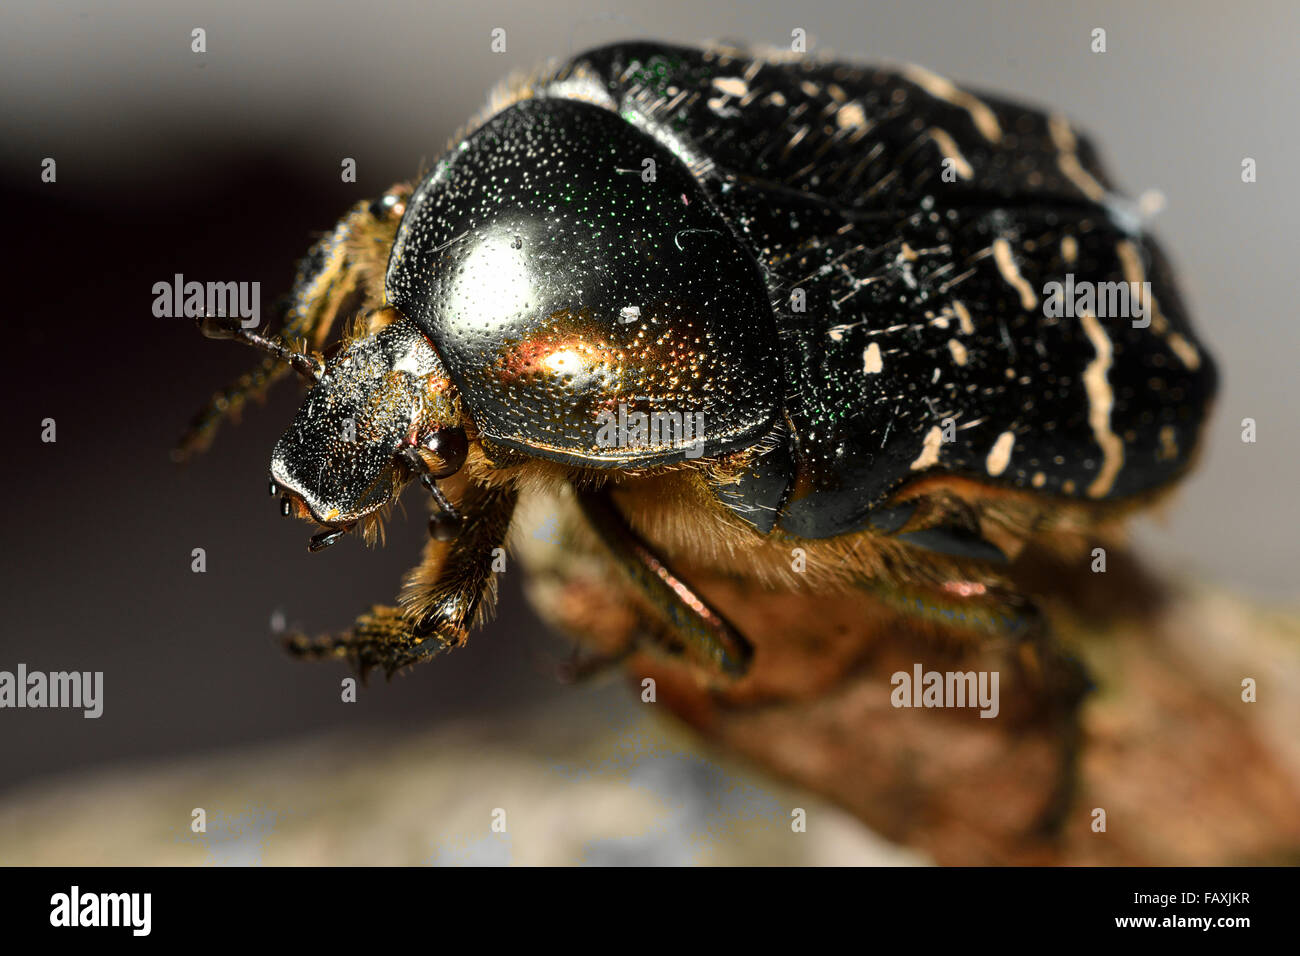 Rose chafer (Cetonia aurata) close-up, with view of hairs and eye. An  iridescent green and white beetle in family Scarabaeidae Stock Photo